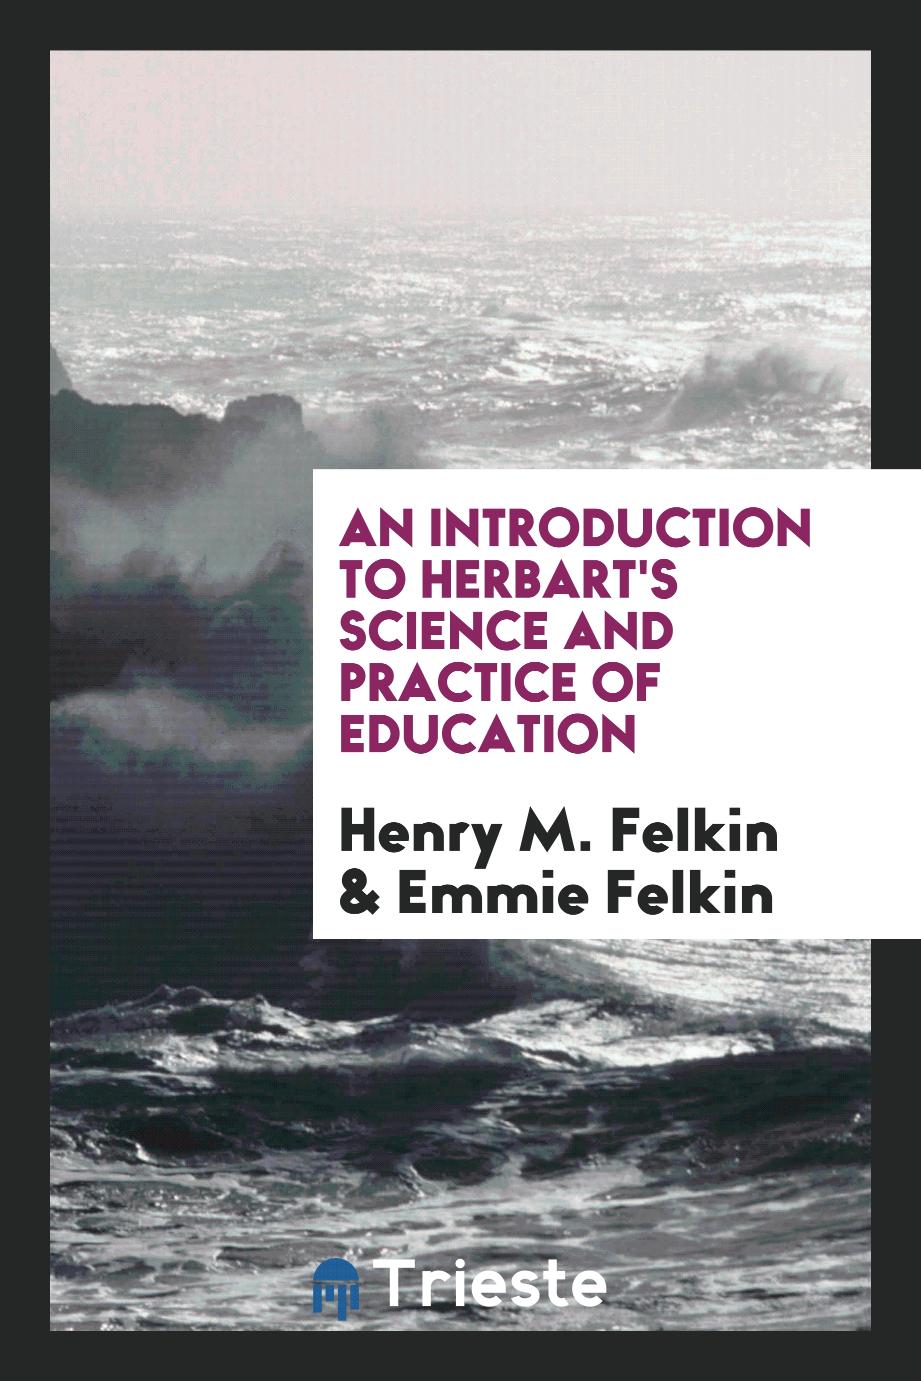 An introduction to Herbart's Science and practice of education